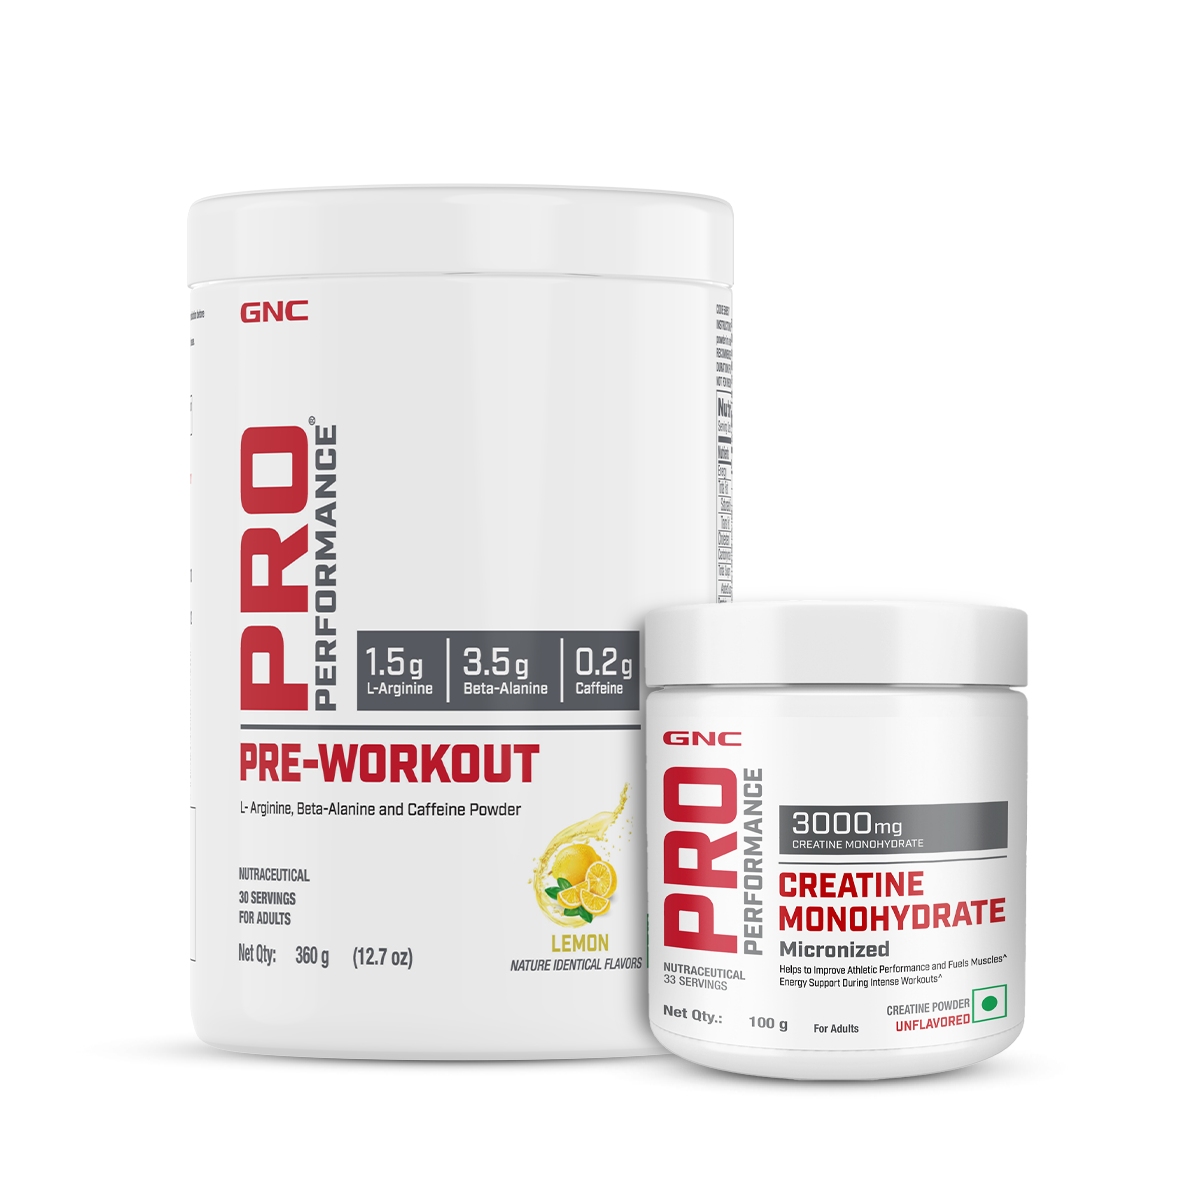 GNC Pro Performance Pre-Workout + Creatine 100 mg - Improves Energy & Focus | Supports Intense Workout